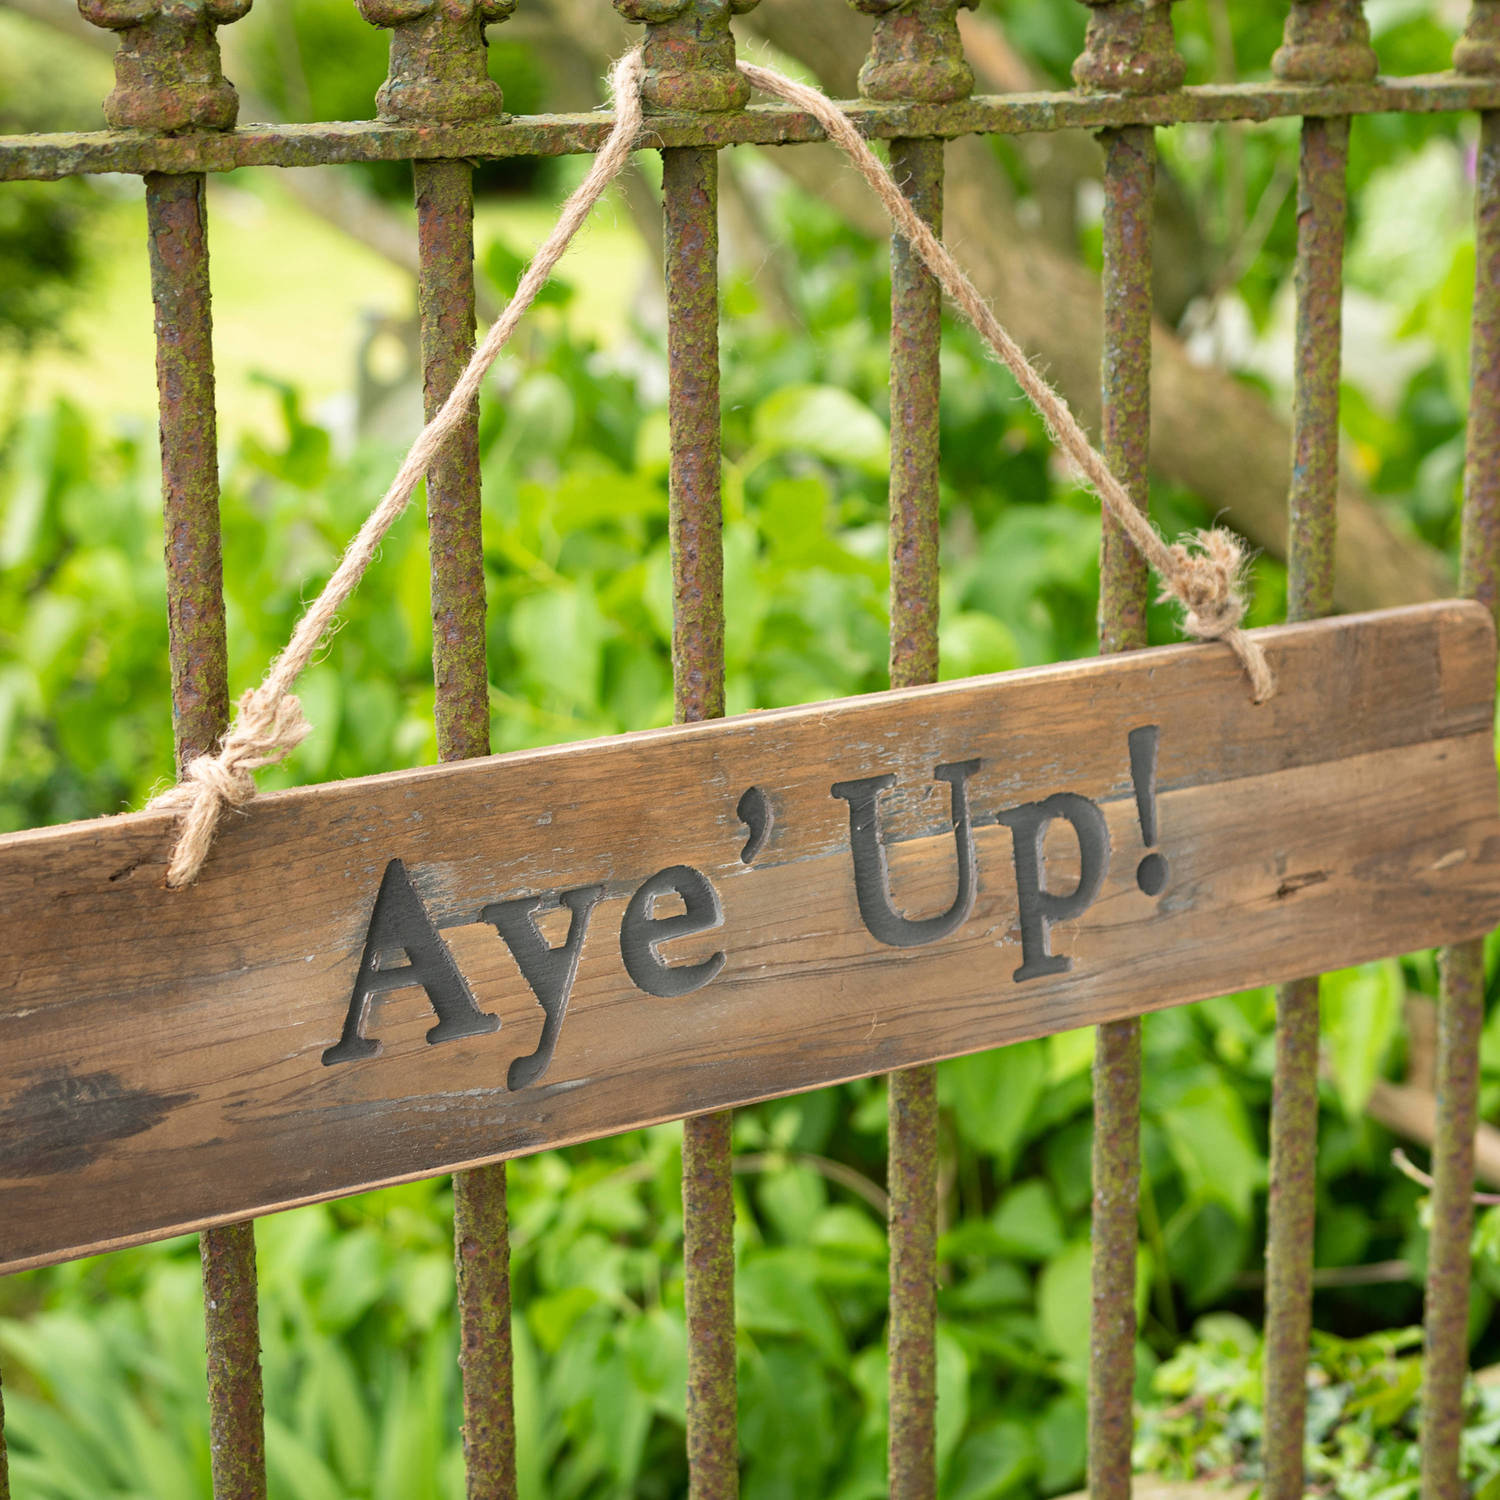 Aye' Up Rustic Wooden Message Plaque - Image 4